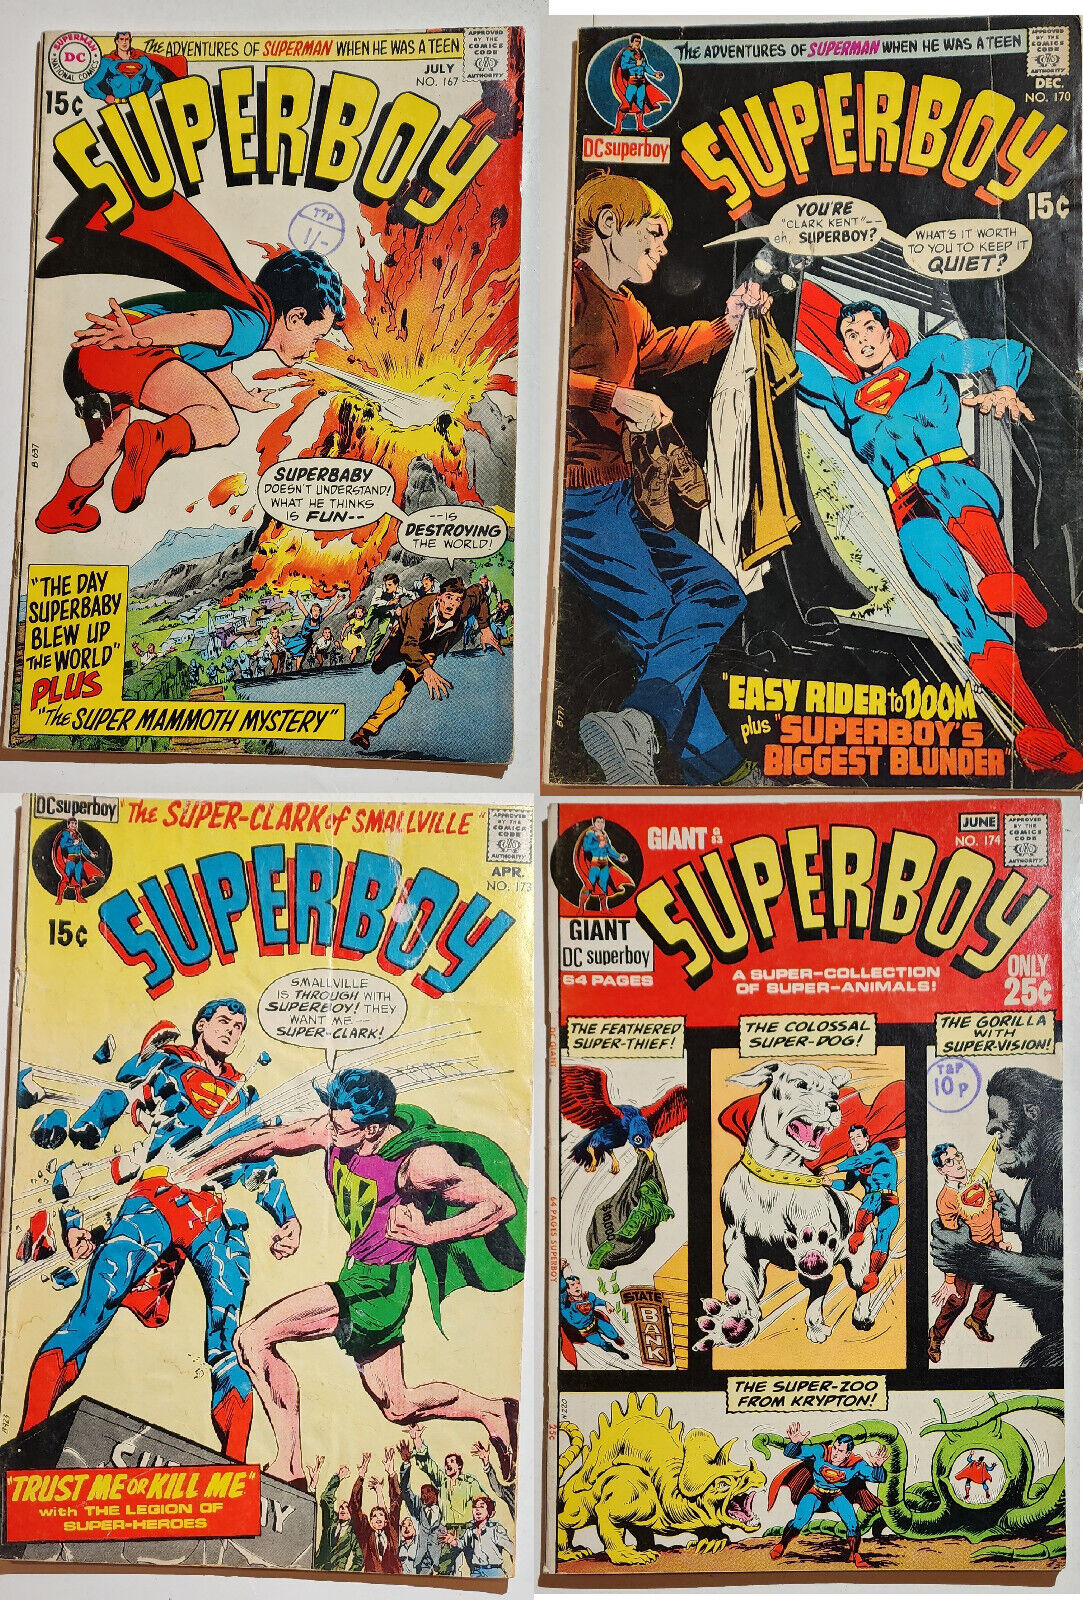 SUPERBOY Silver Age Lot #167, 170, 173, 174 - NEAL ADAMS - I combine shipping